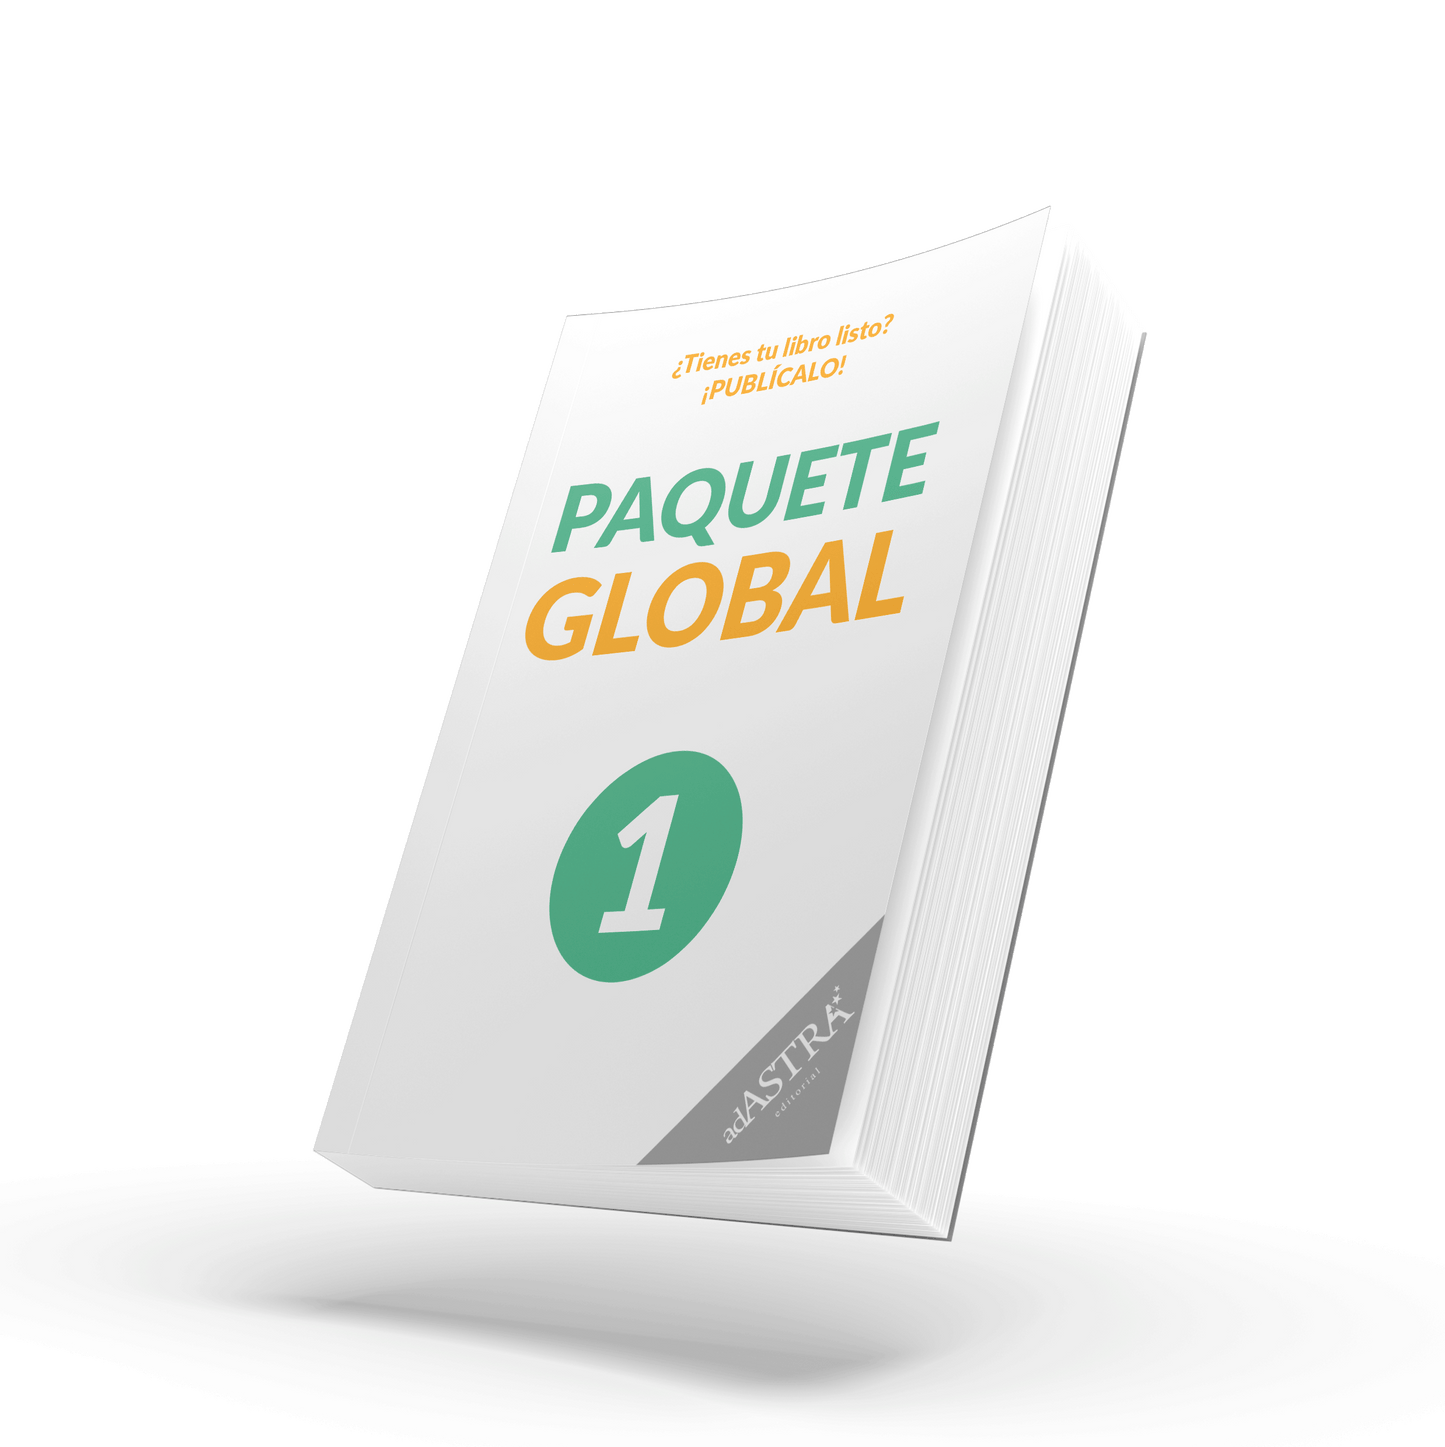 Paquete Global